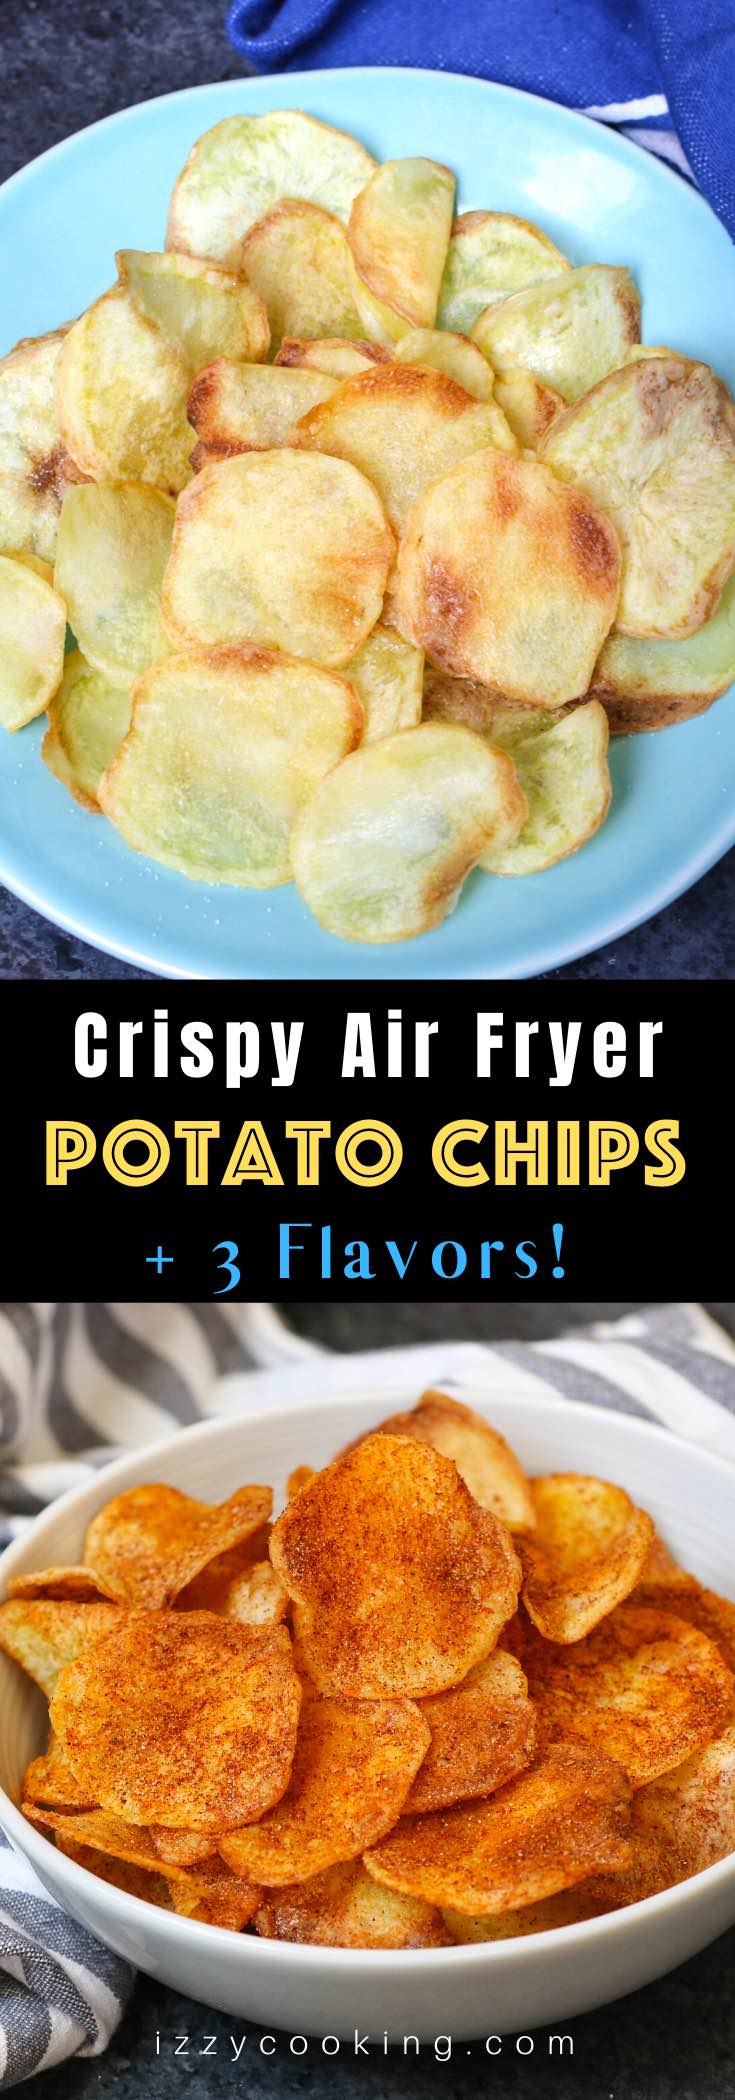 Crispy and healthy homemade Air Fryer Potato Chips made with only 3 ingredients. It's an easy and guilt-free recipe as you'll only need a small amount of cooking spray. Season them up the way you like. This crunchy snack tastes so good and you’ll never buy store-bought potato chips again!